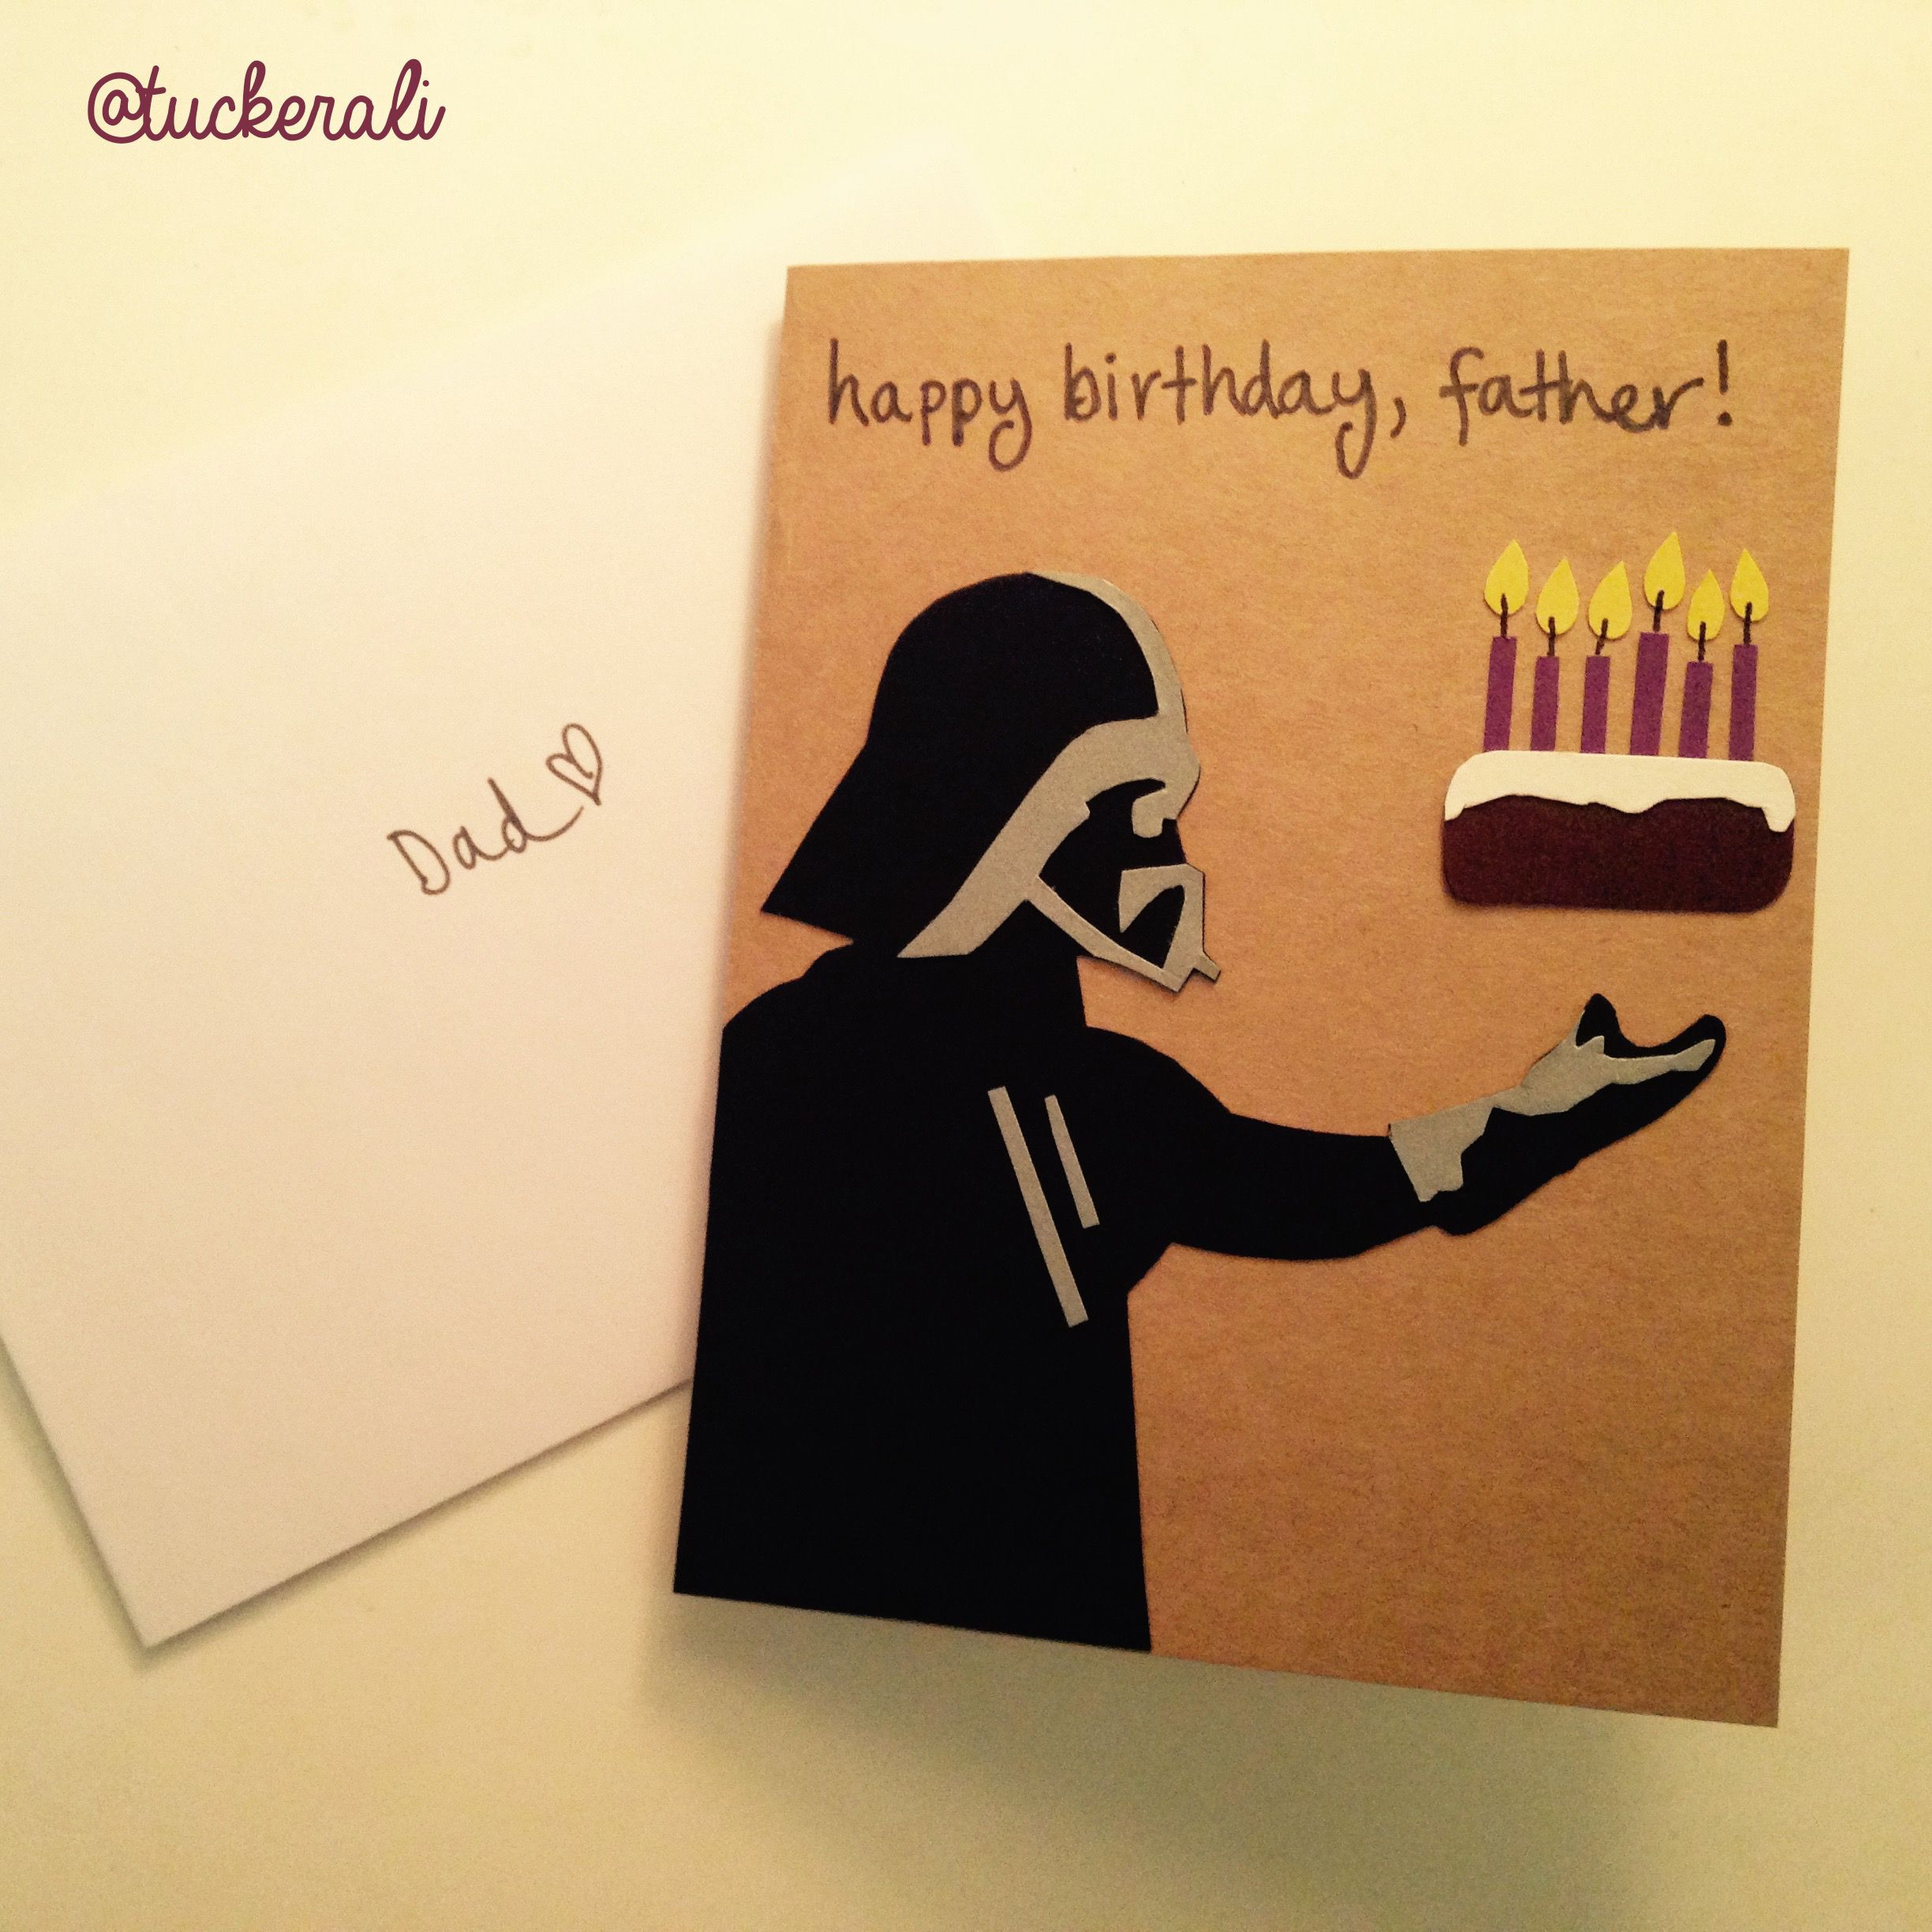 Easy Birthday Card Ideas For Dad Cool Easy Birthday Cards This Was A Super Cute Idea I M Sure My